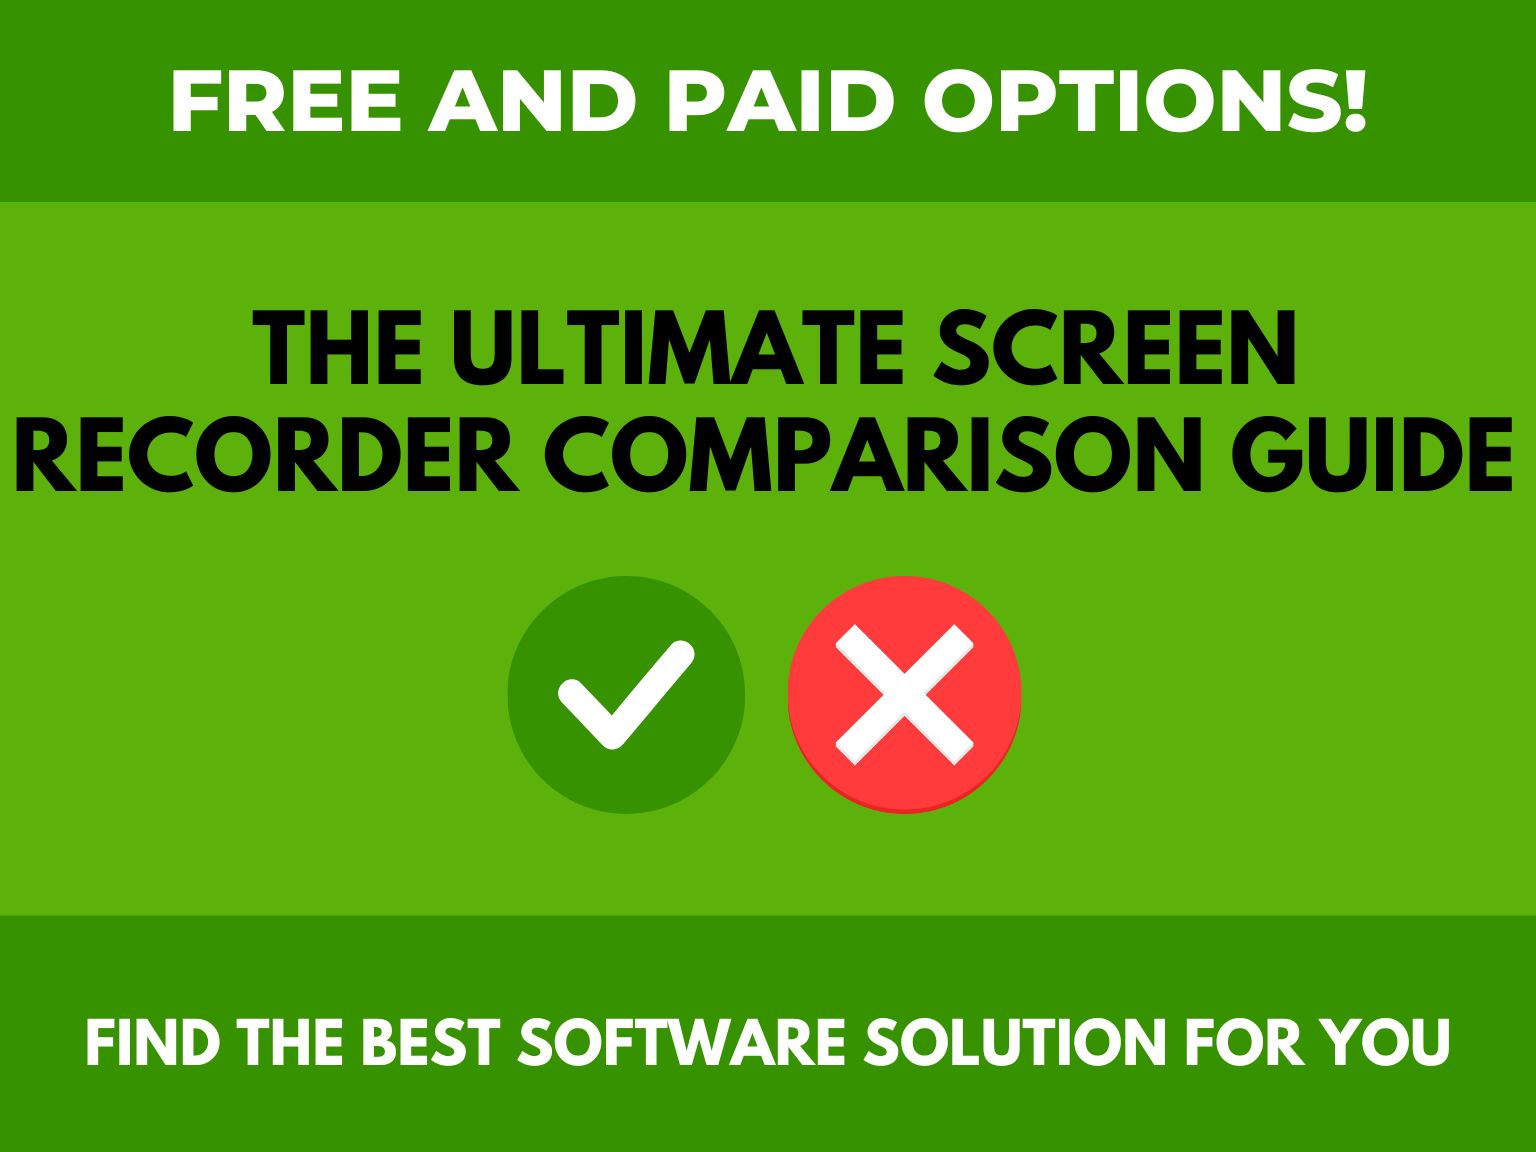 The Ultimate Screen Recorder Comparison Guide (Free and Paid Options)